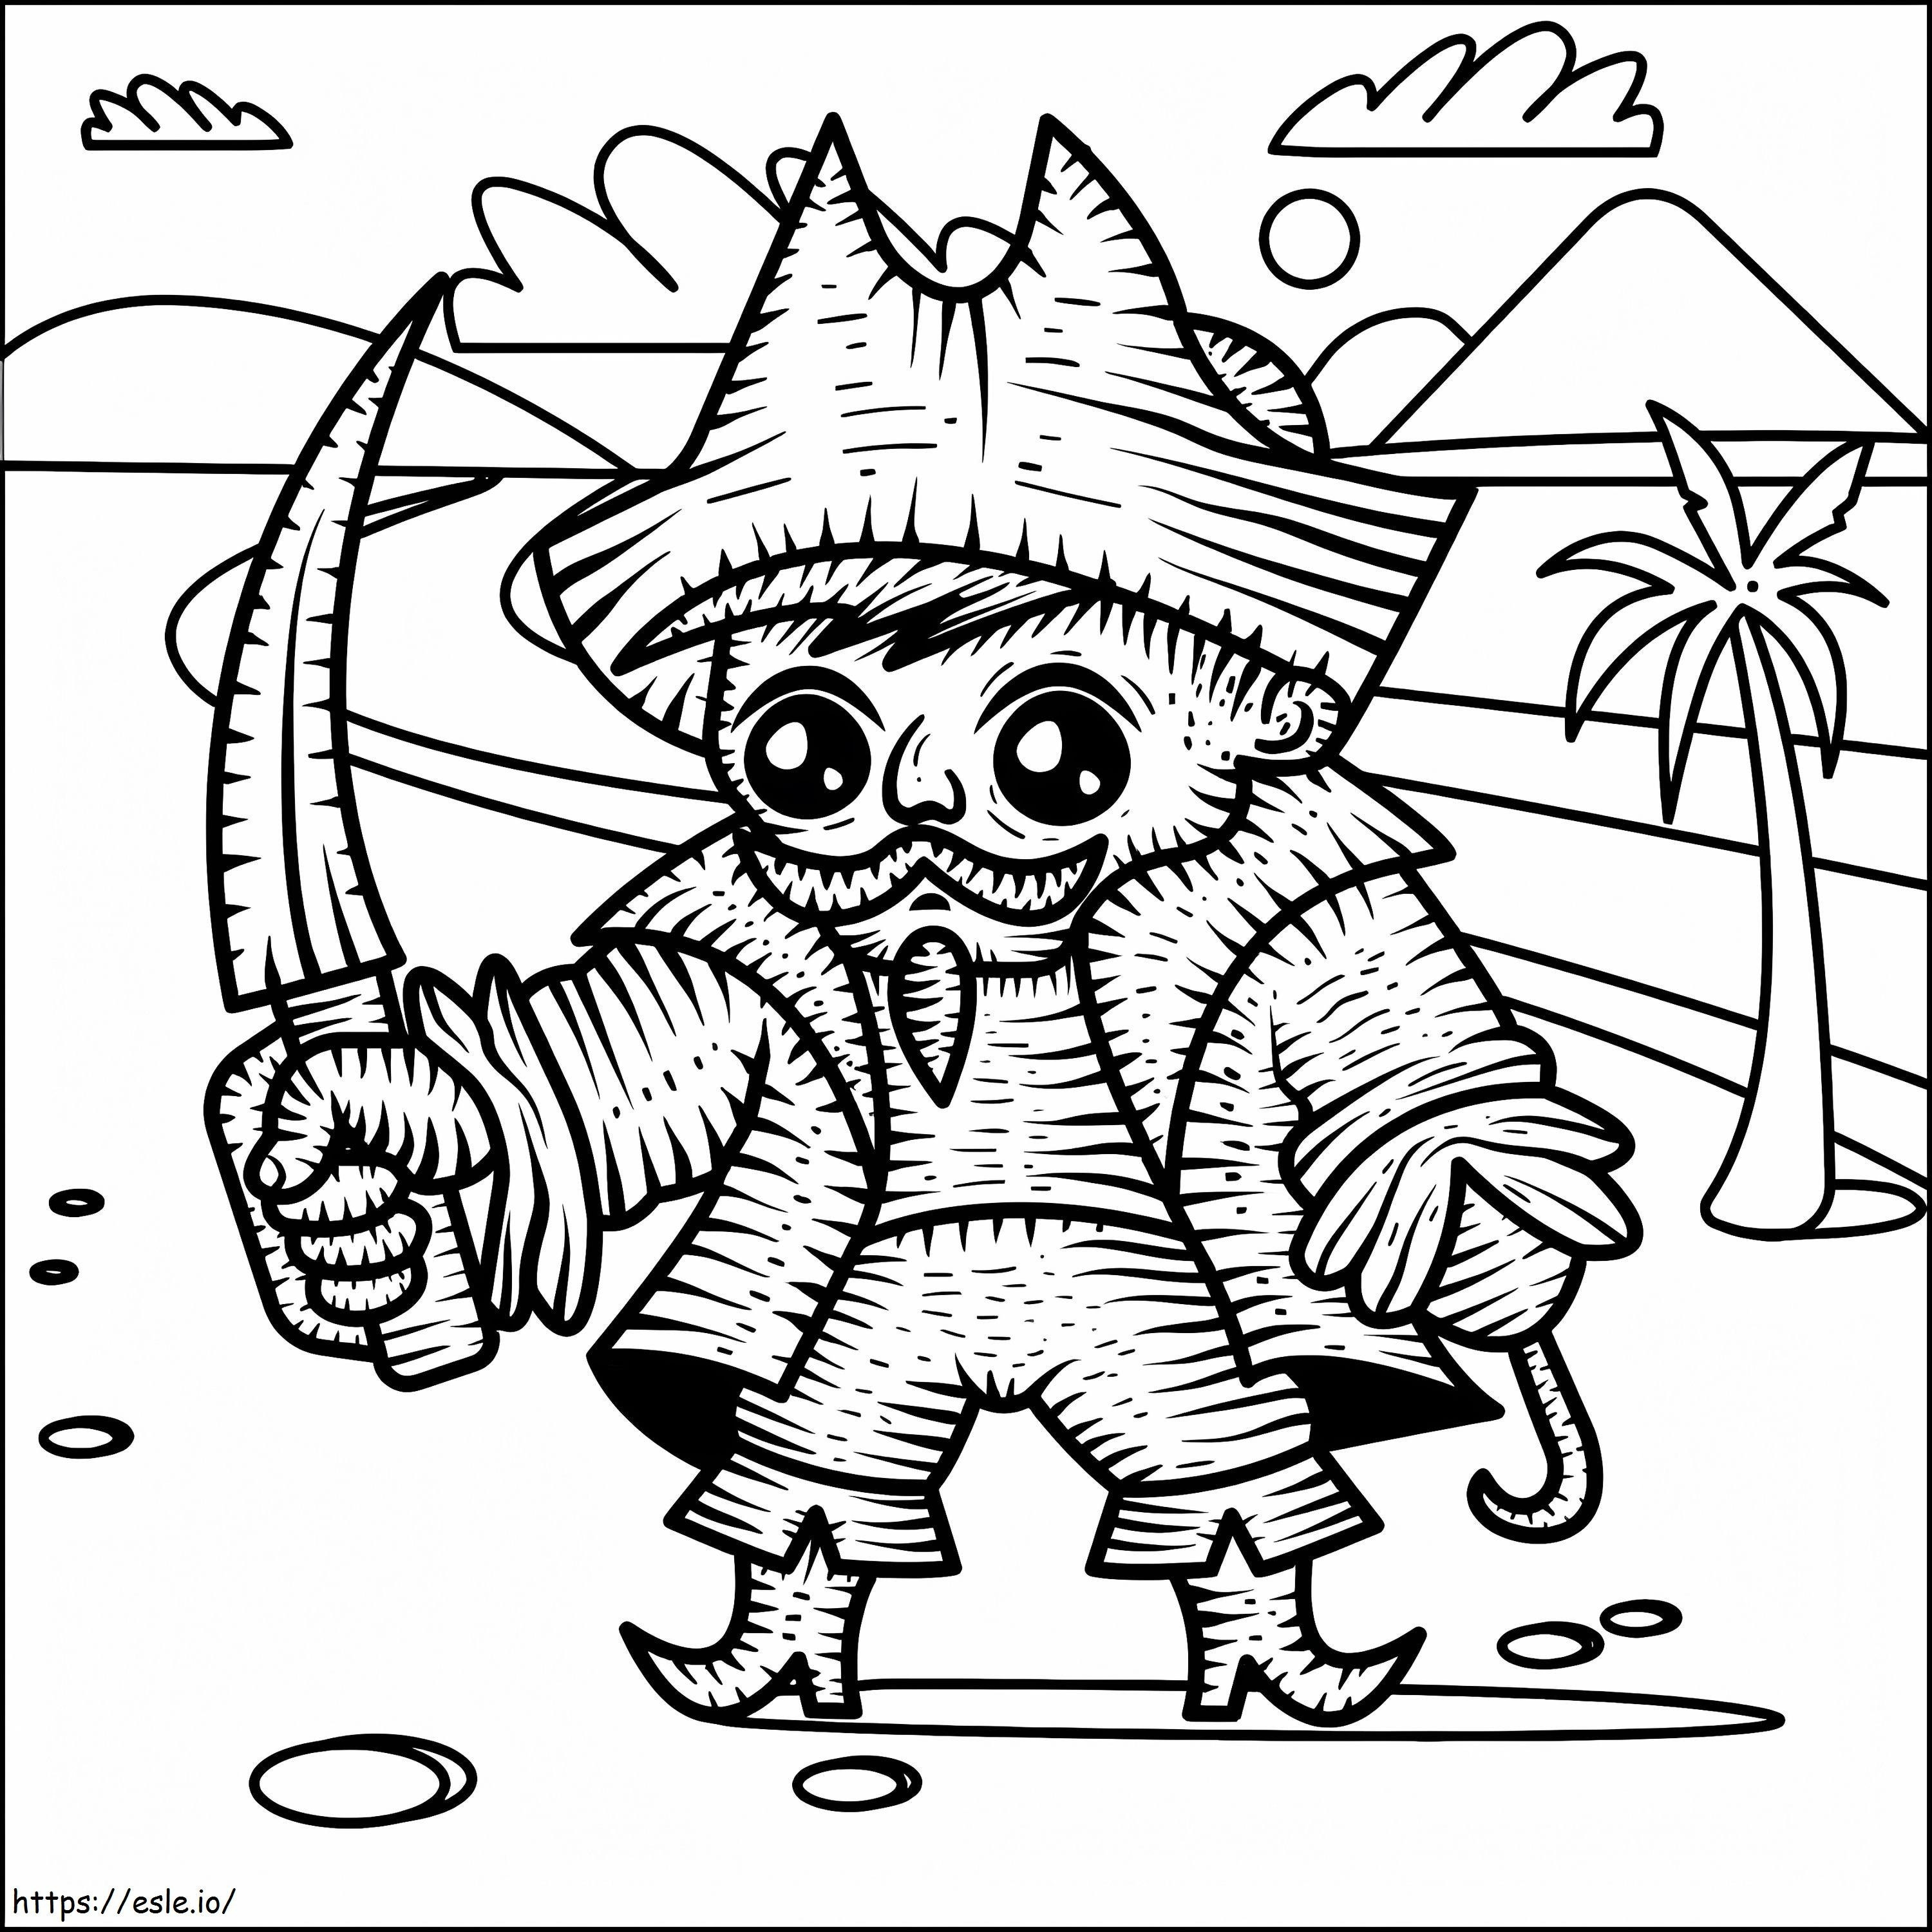 Pirate 3 coloring page